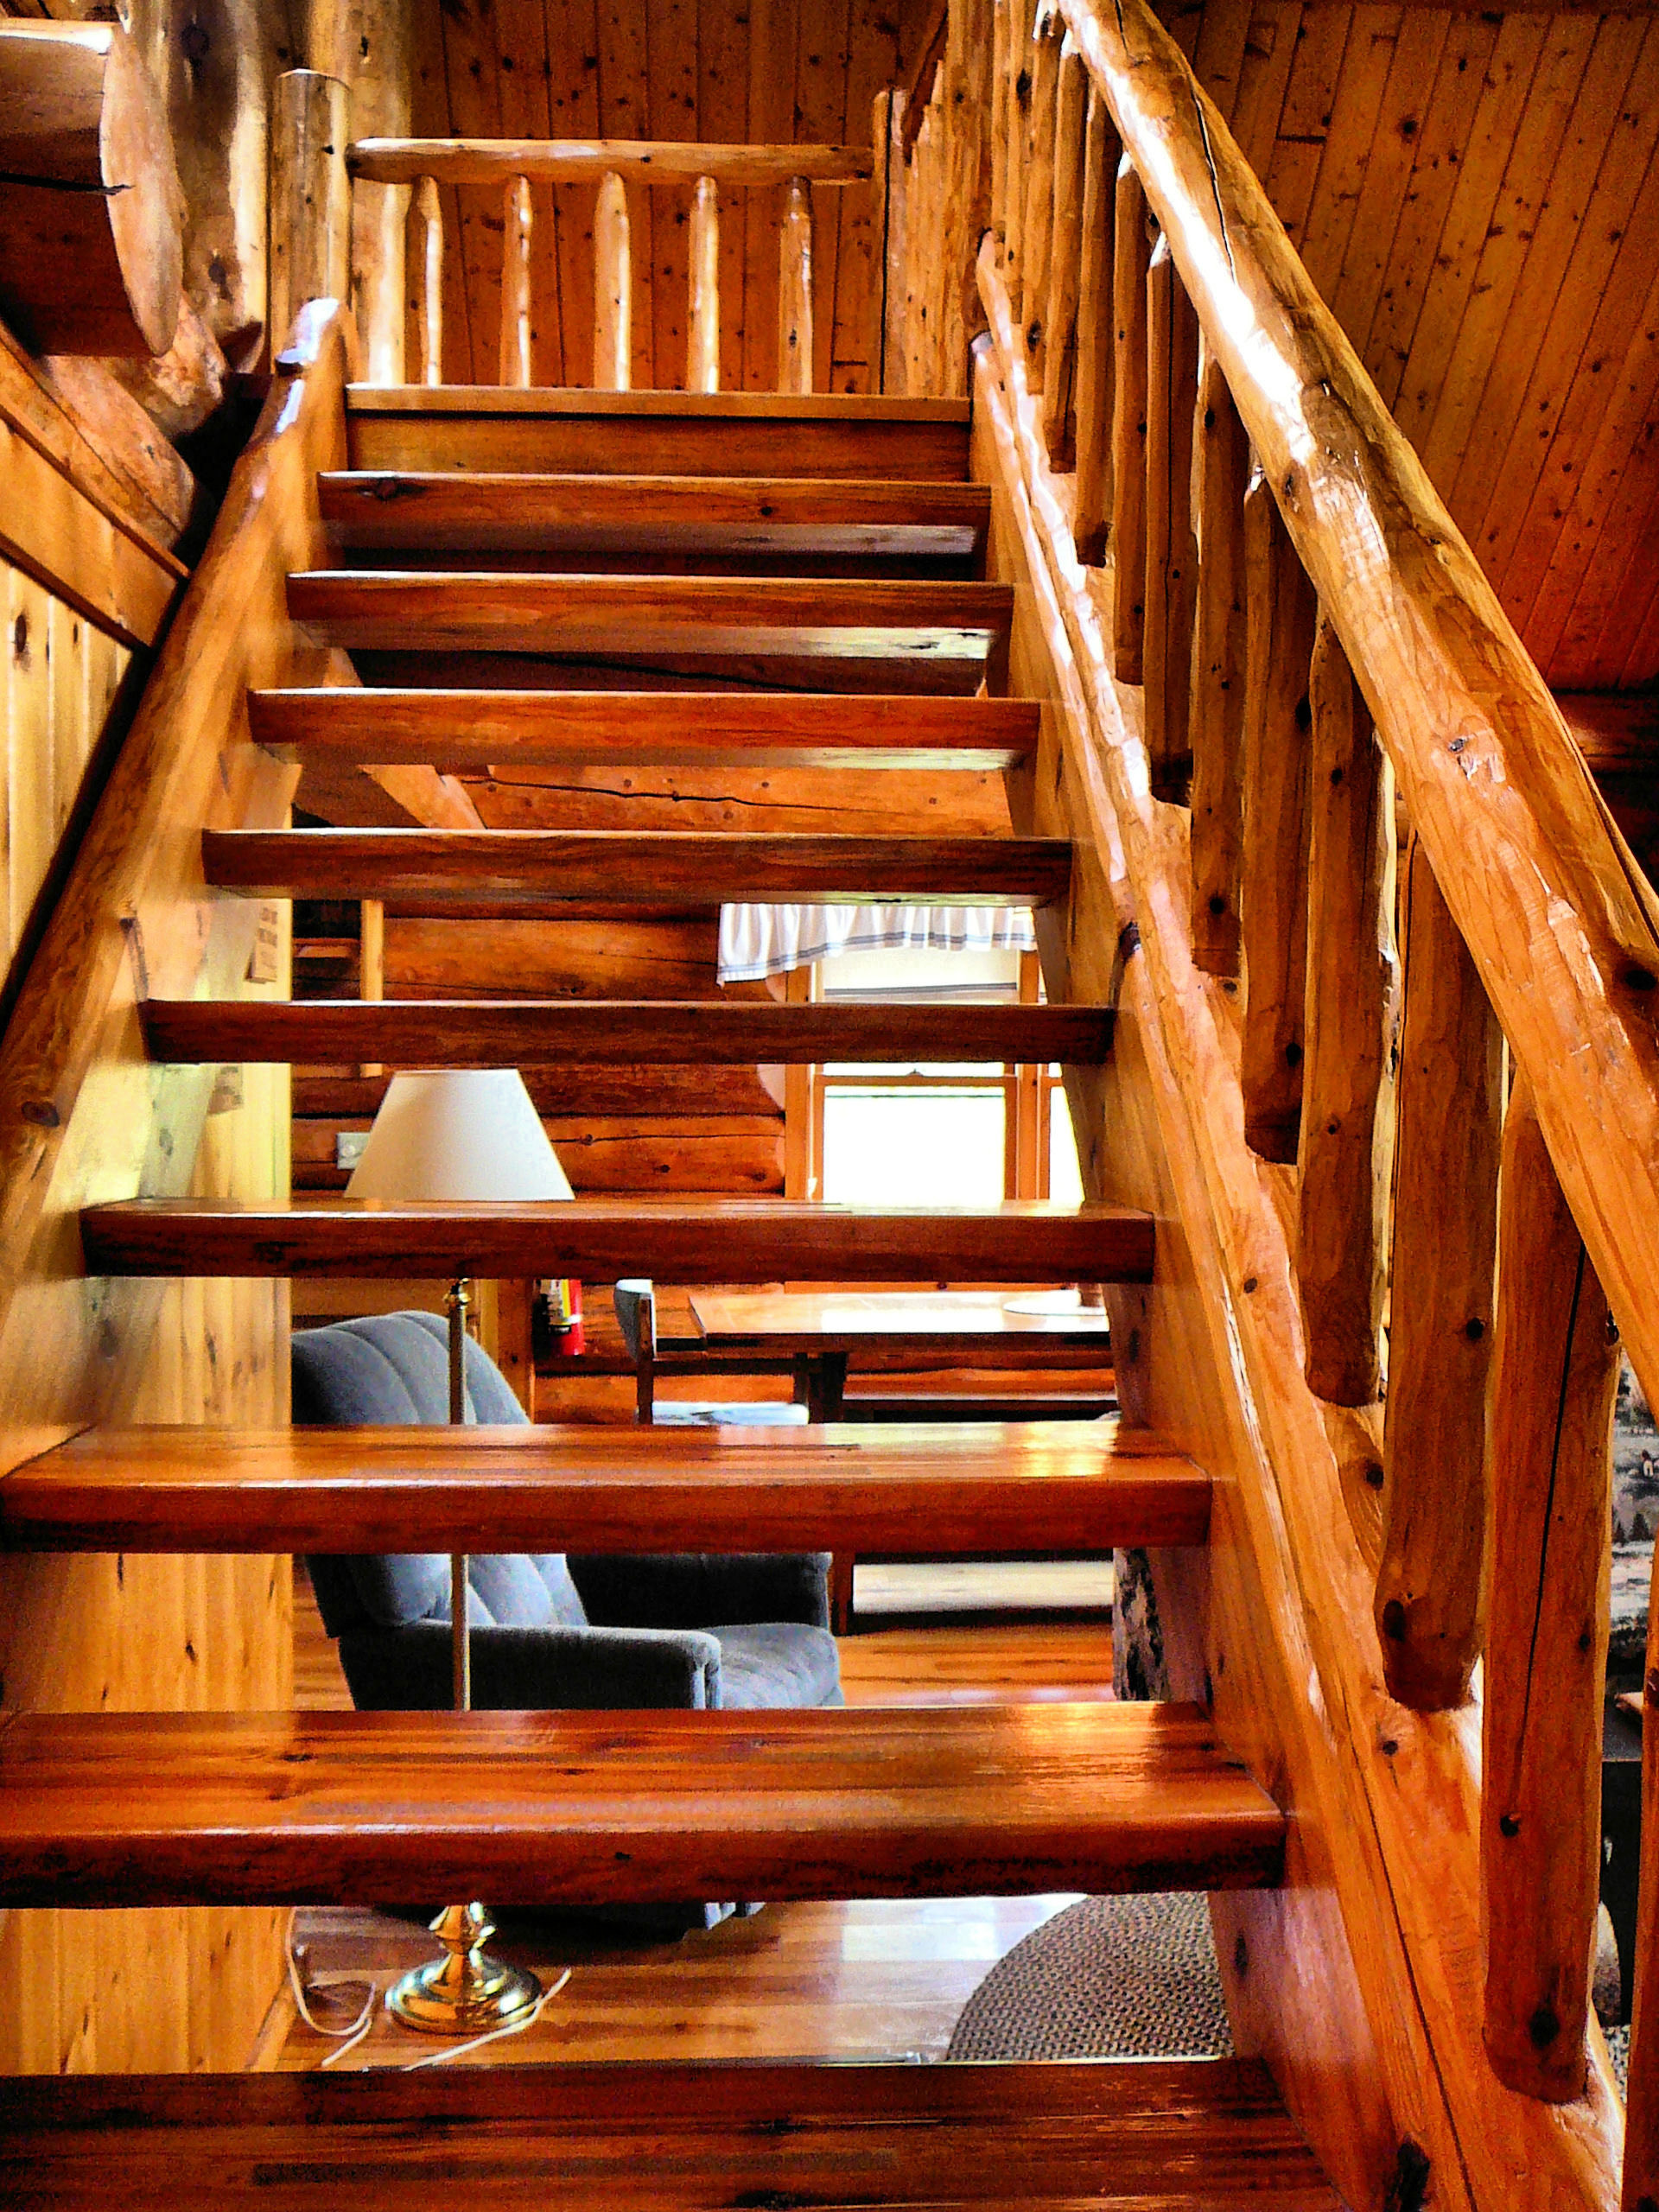 Log steps leading to loft area with chair seen between stair slats